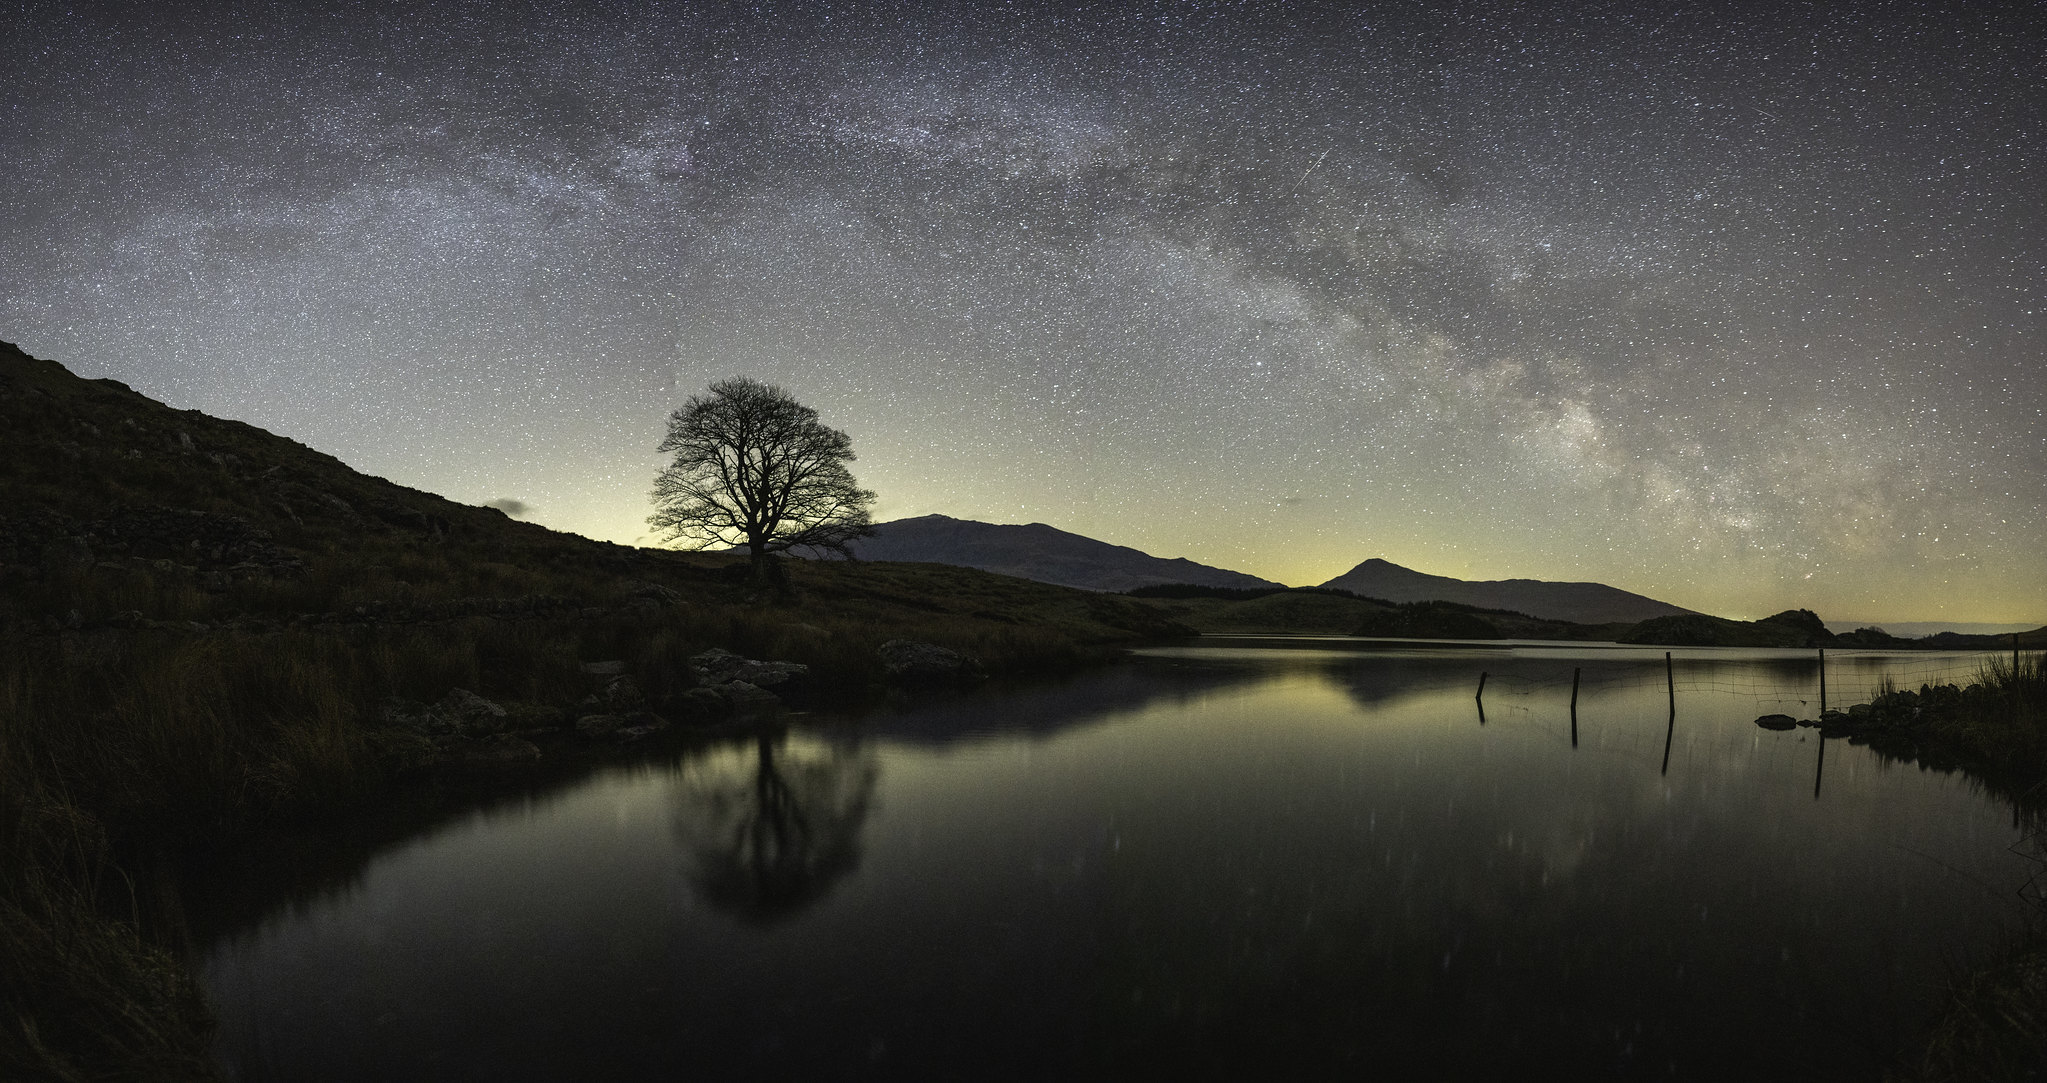 Panorama of Llyn y Dywarchen in Eryri. We planned this shot using an online app which detailed where the Milky Way was going to arch and what time. A few minutes before this image was taken the sky was cloudy and it was snowing. The sky cleared for